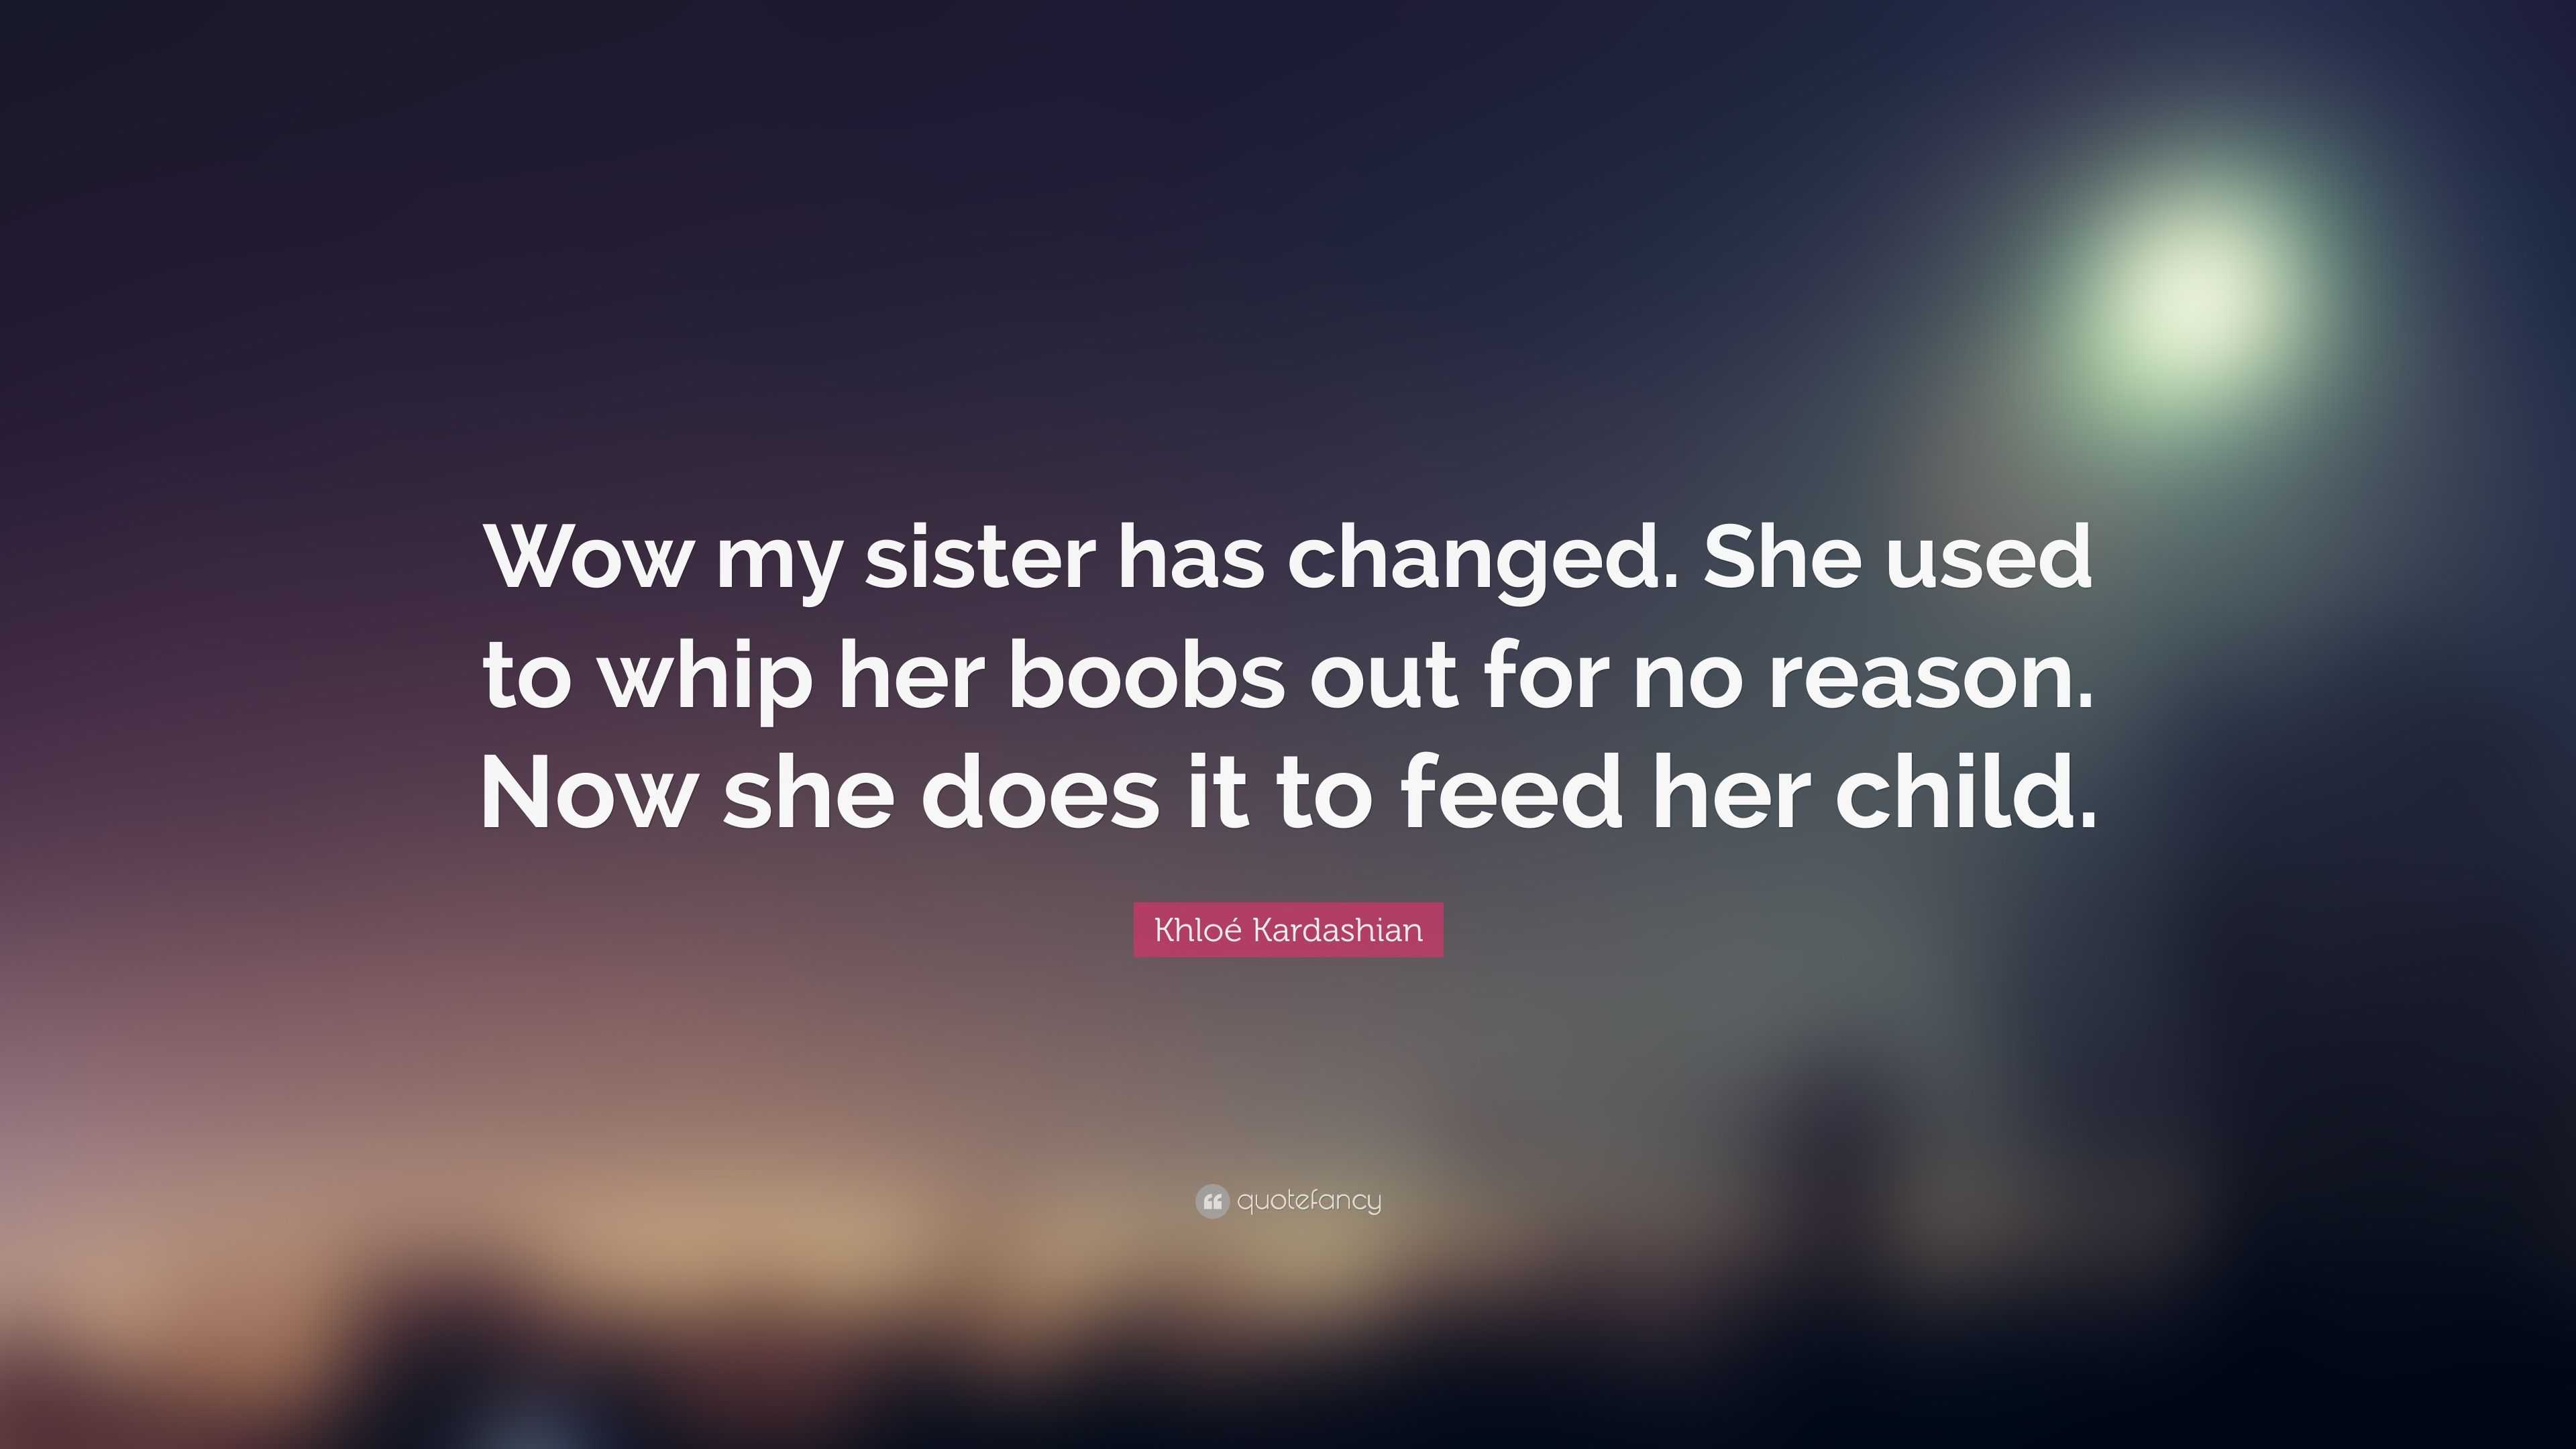 Khloé Kardashian Quote: “Wow my sister has changed. She used to